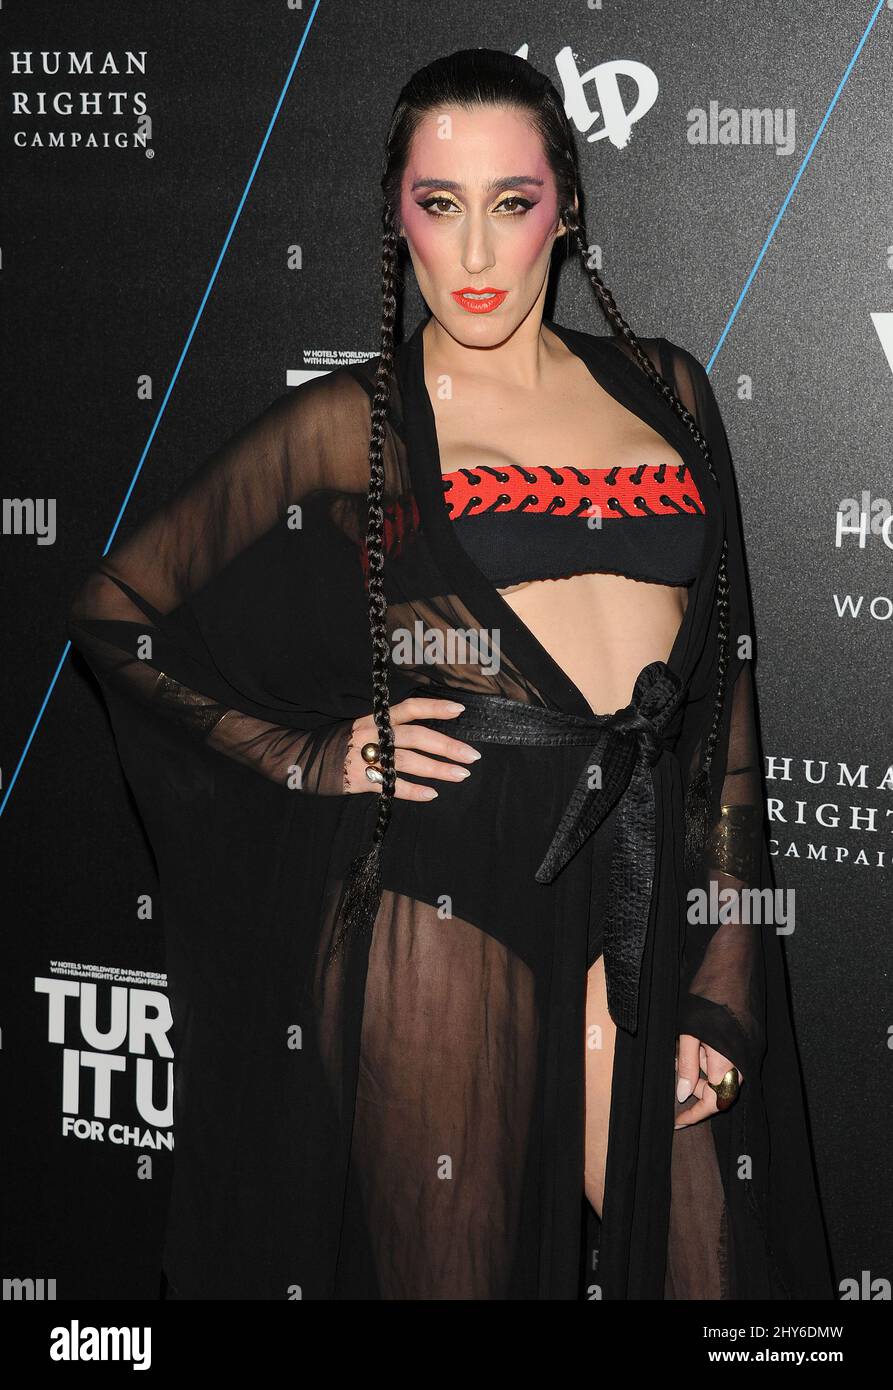 Ladyfag attends the W Hotels Turn It Up For Change Ball to Benefit Human Rights Campaign at W Hollywood, February 5, 2015. Los Angeles, Ca. Stock Photo